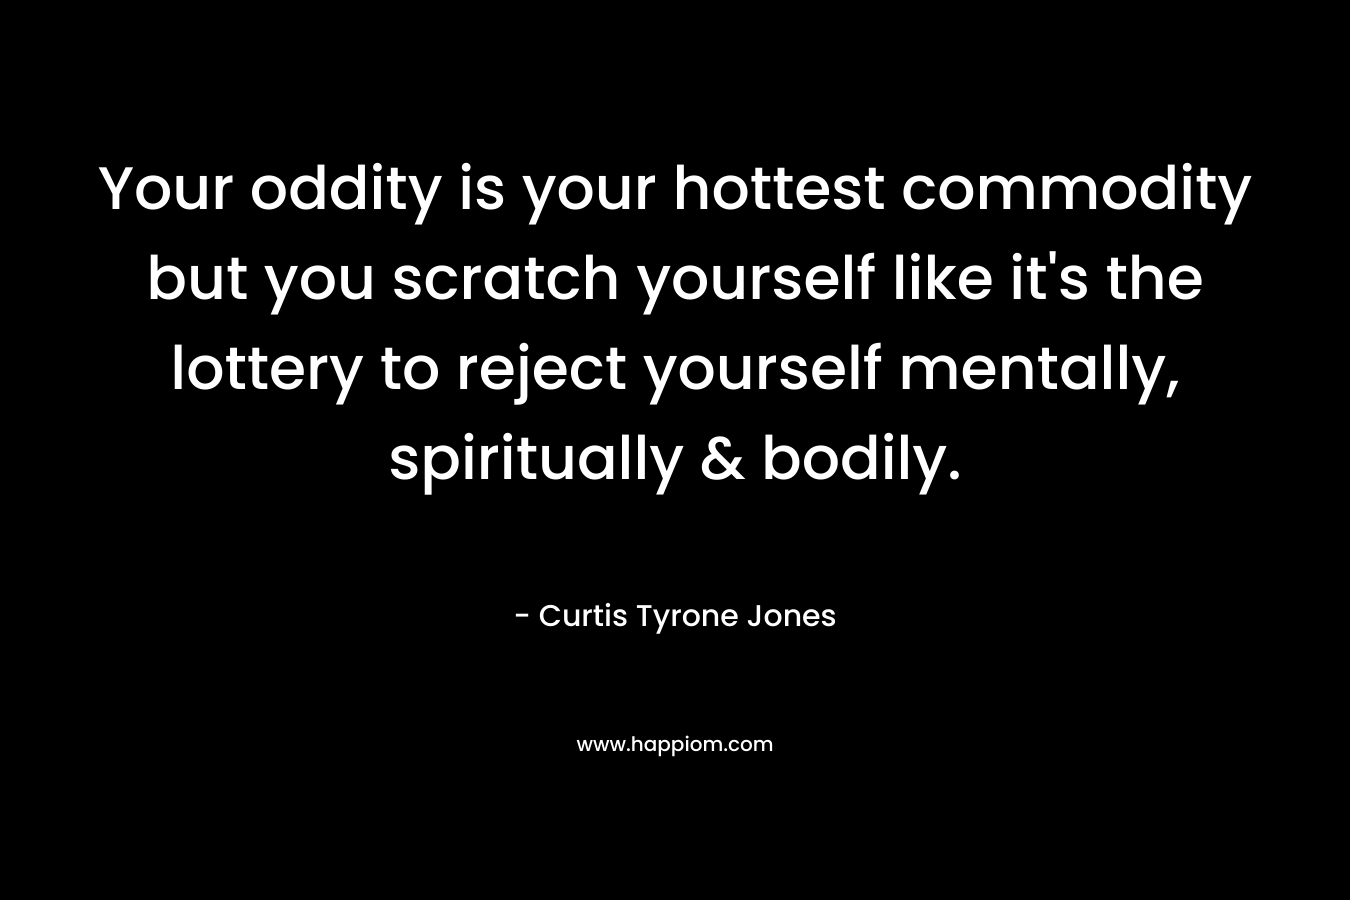 Your oddity is your hottest commodity but you scratch yourself like it’s the lottery to reject yourself mentally, spiritually & bodily. – Curtis Tyrone Jones